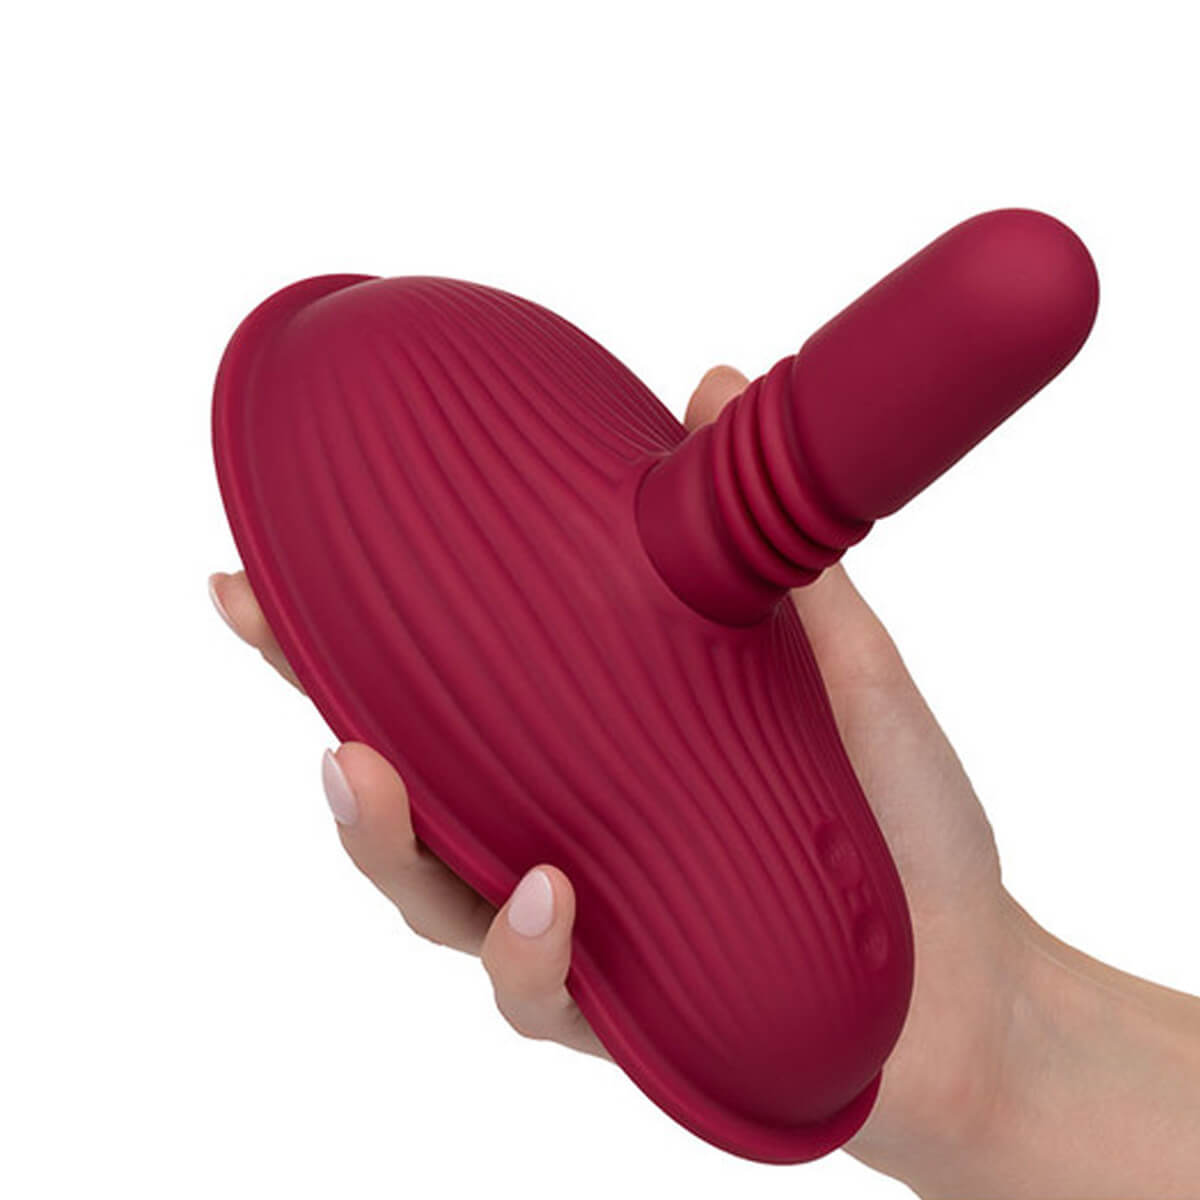 Hand holding a Red silicone grinding pad with shaft for internal stimulation Nudie Co